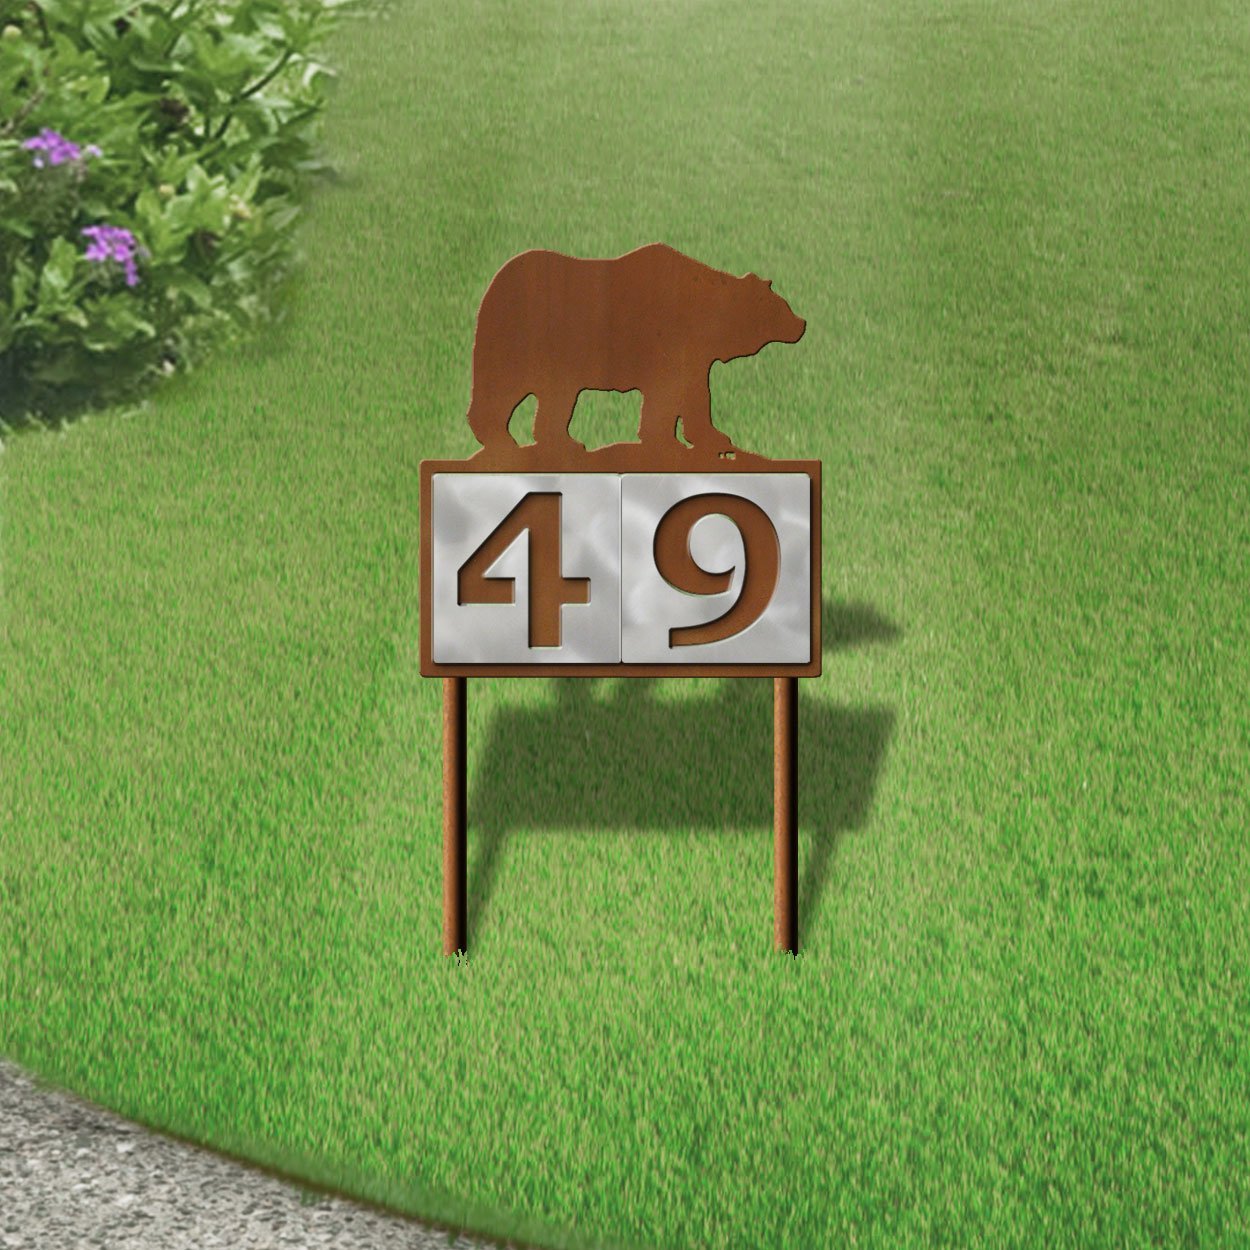 610022 - Bear in the Woods Design 2-Digit Horizontal 6-inch Tile Outdoor House Numbers Yard Sign